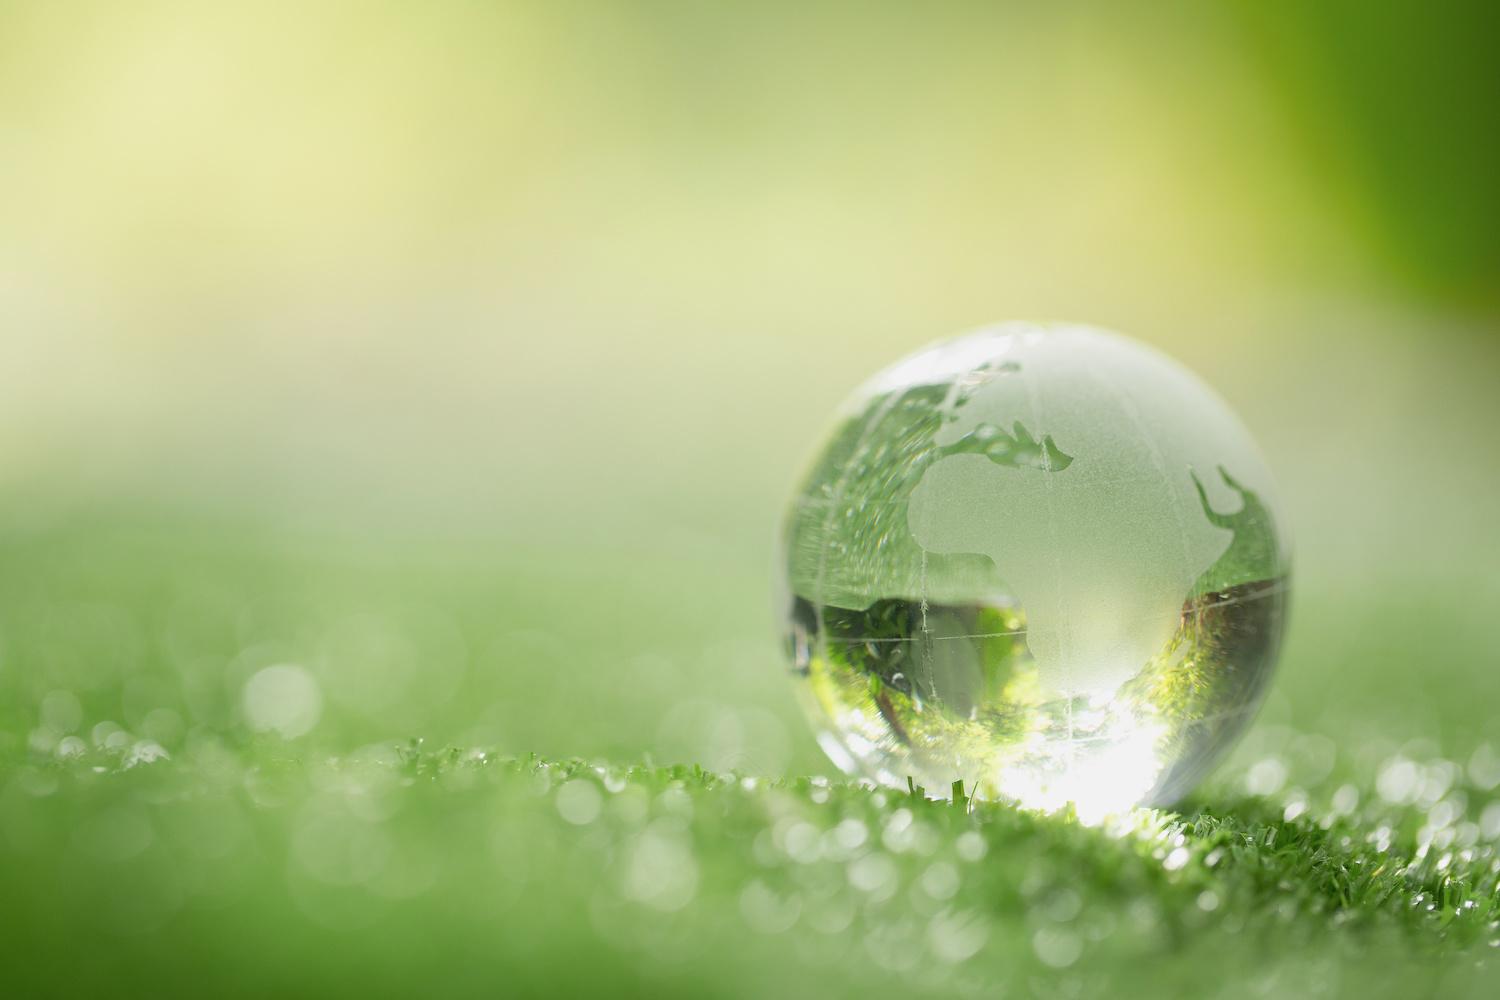 Glass Globe on Leaf - representing sustainability and the circular economy.